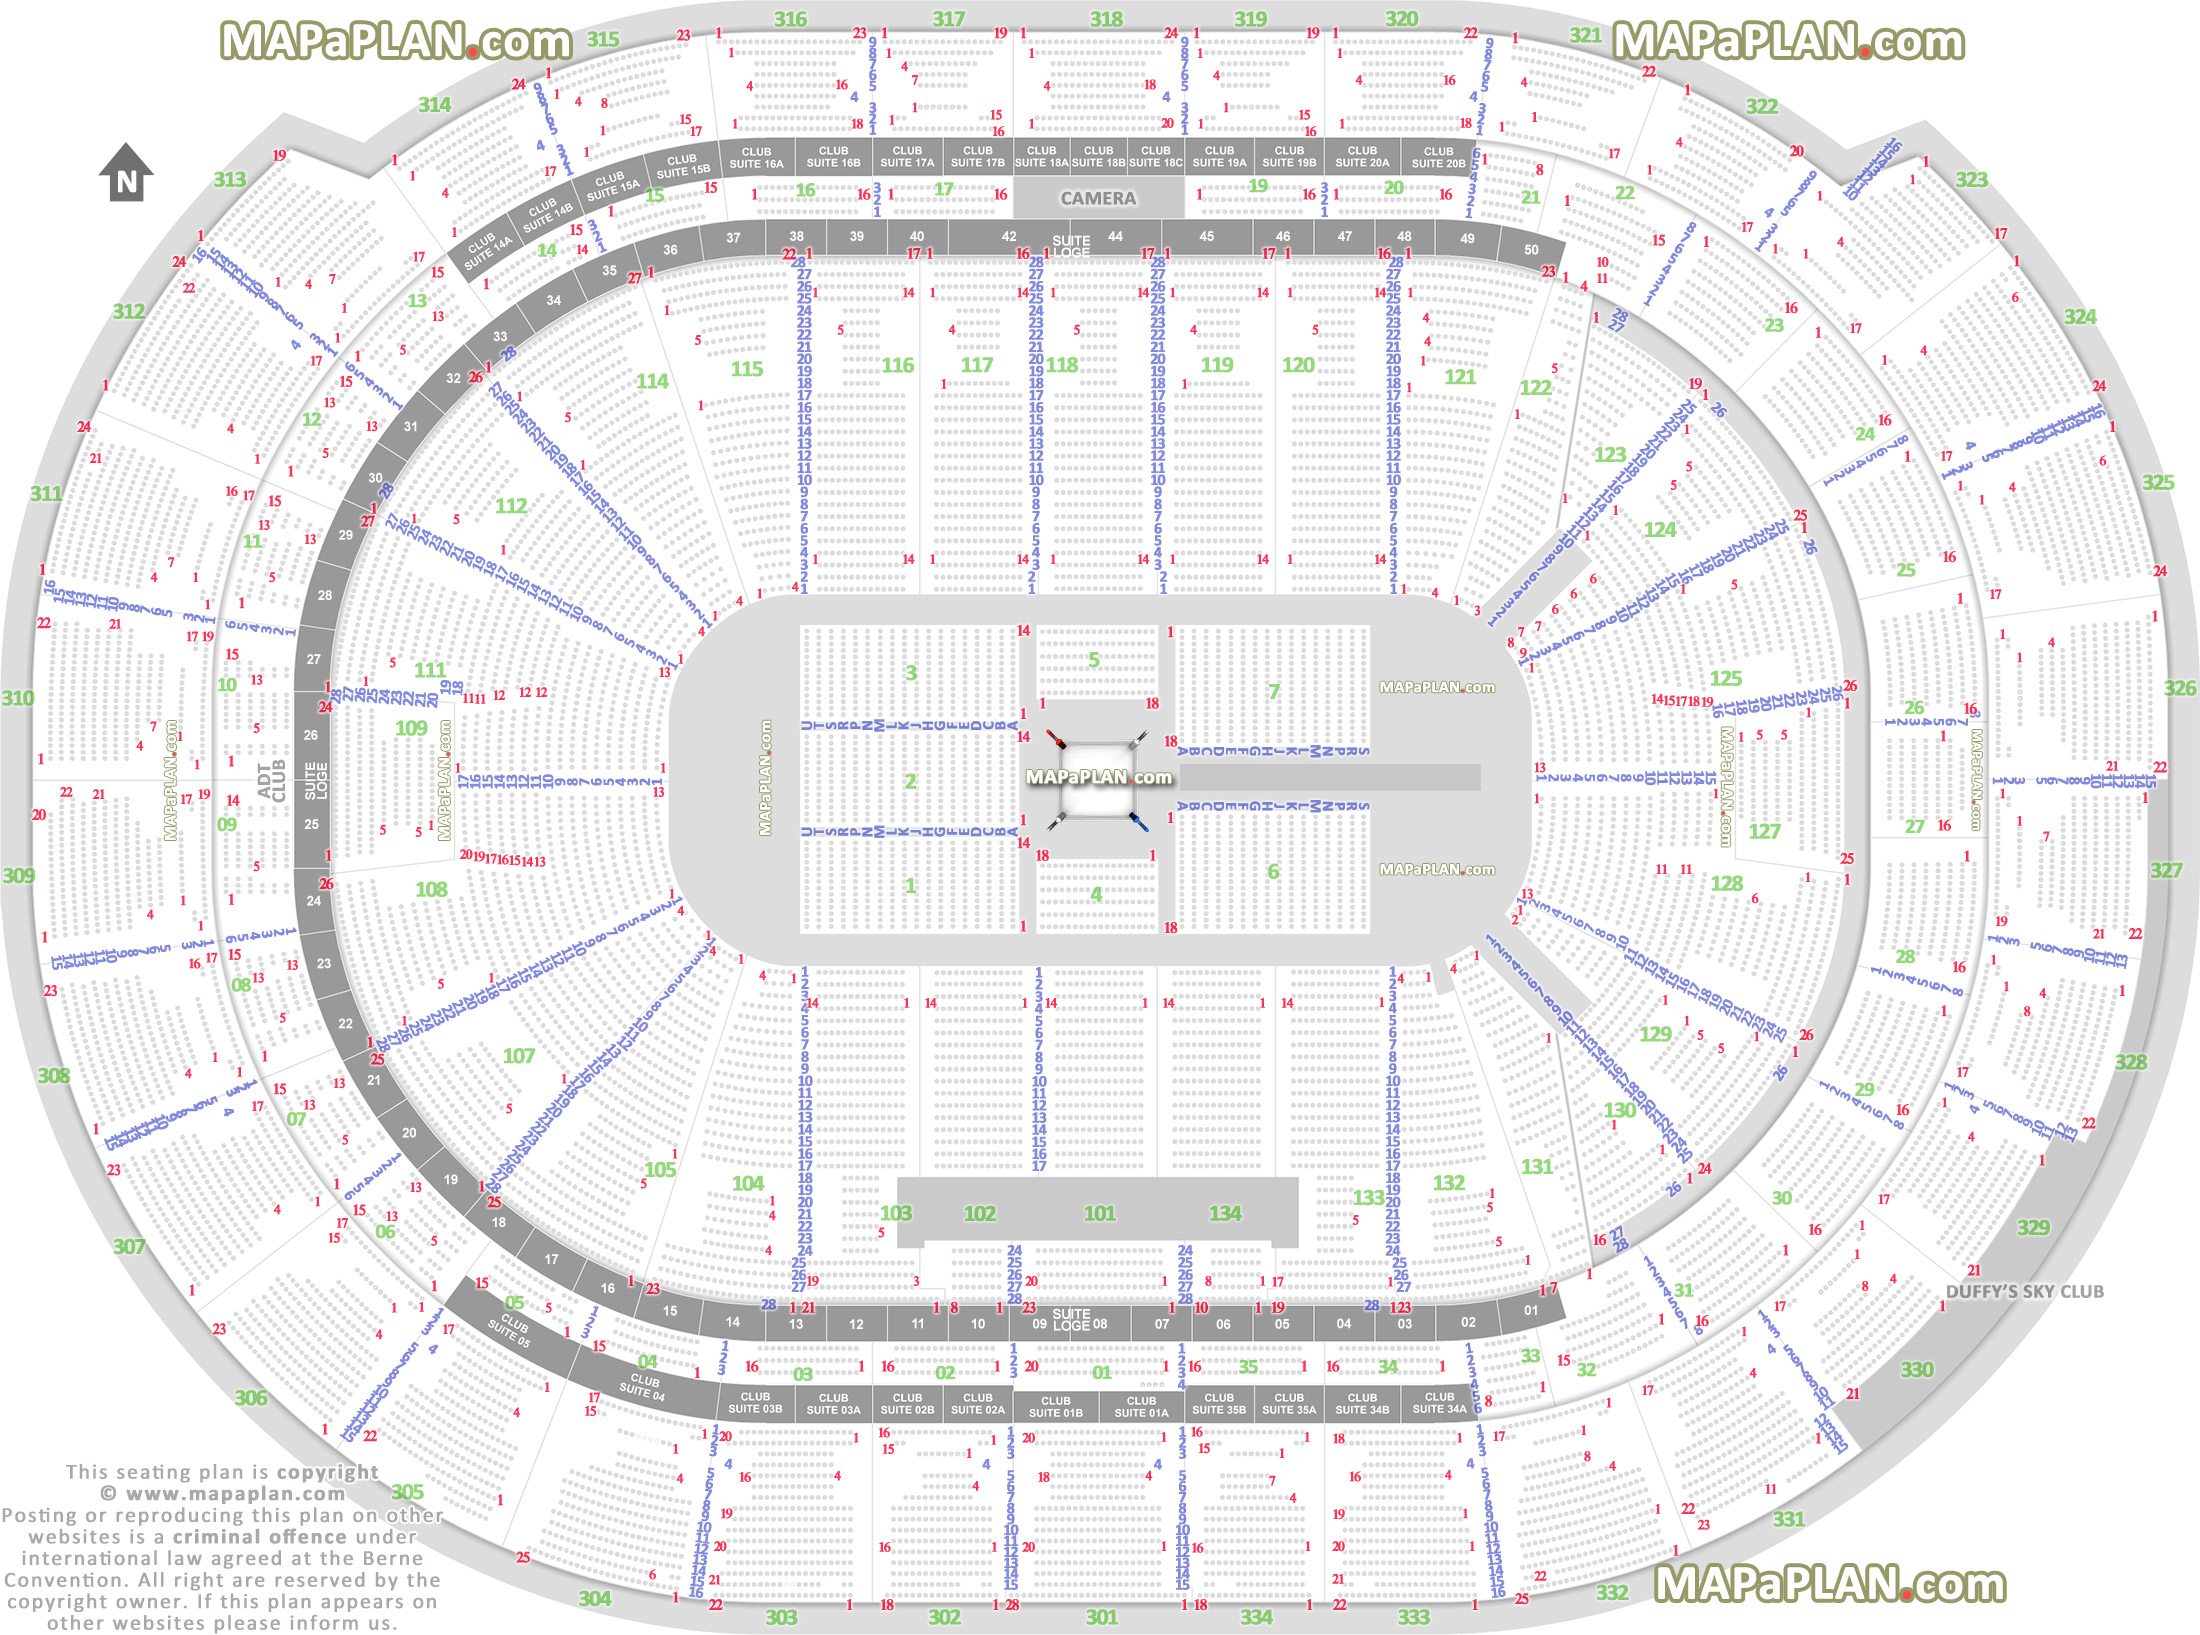 wwe raw smackdown live wrestling boxing match events 360 ring configuration row numbers good bad side seats Sunrise FLA Live Arena seating chart